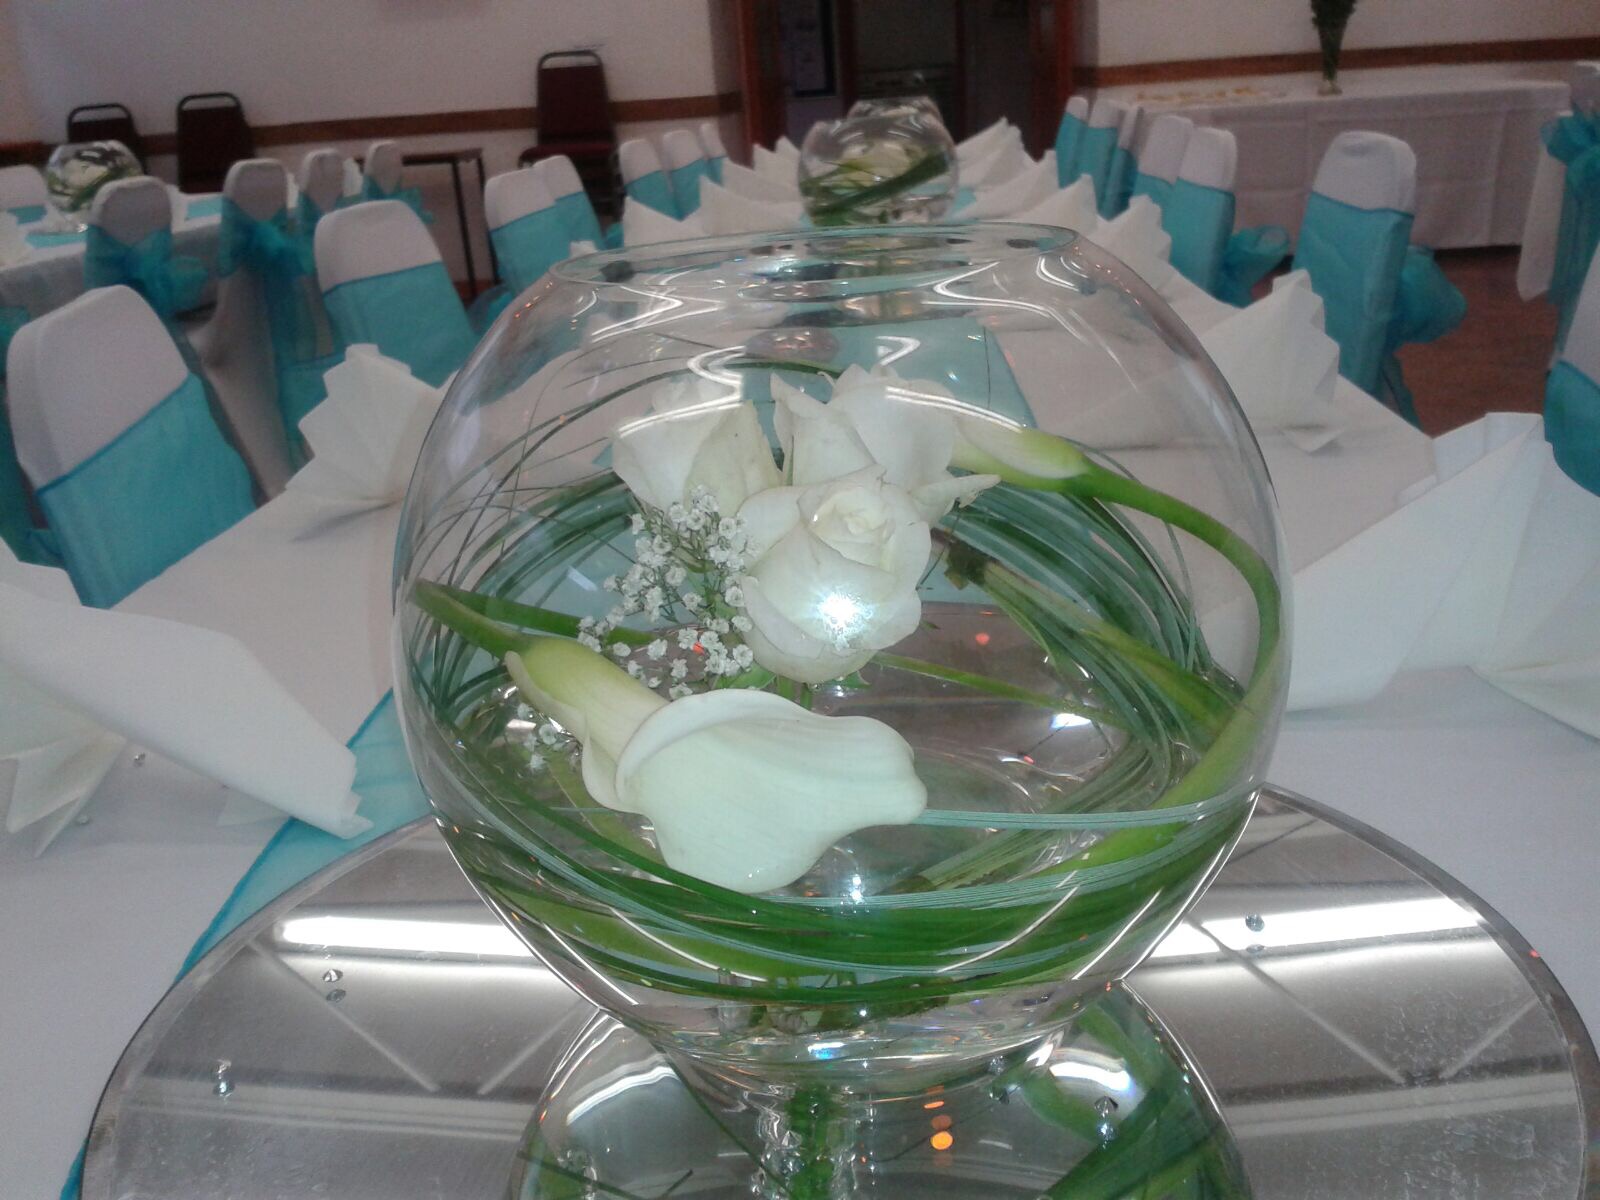 Large Fish Bowl Centrepieces - Beyond Expectations Weddings & Events